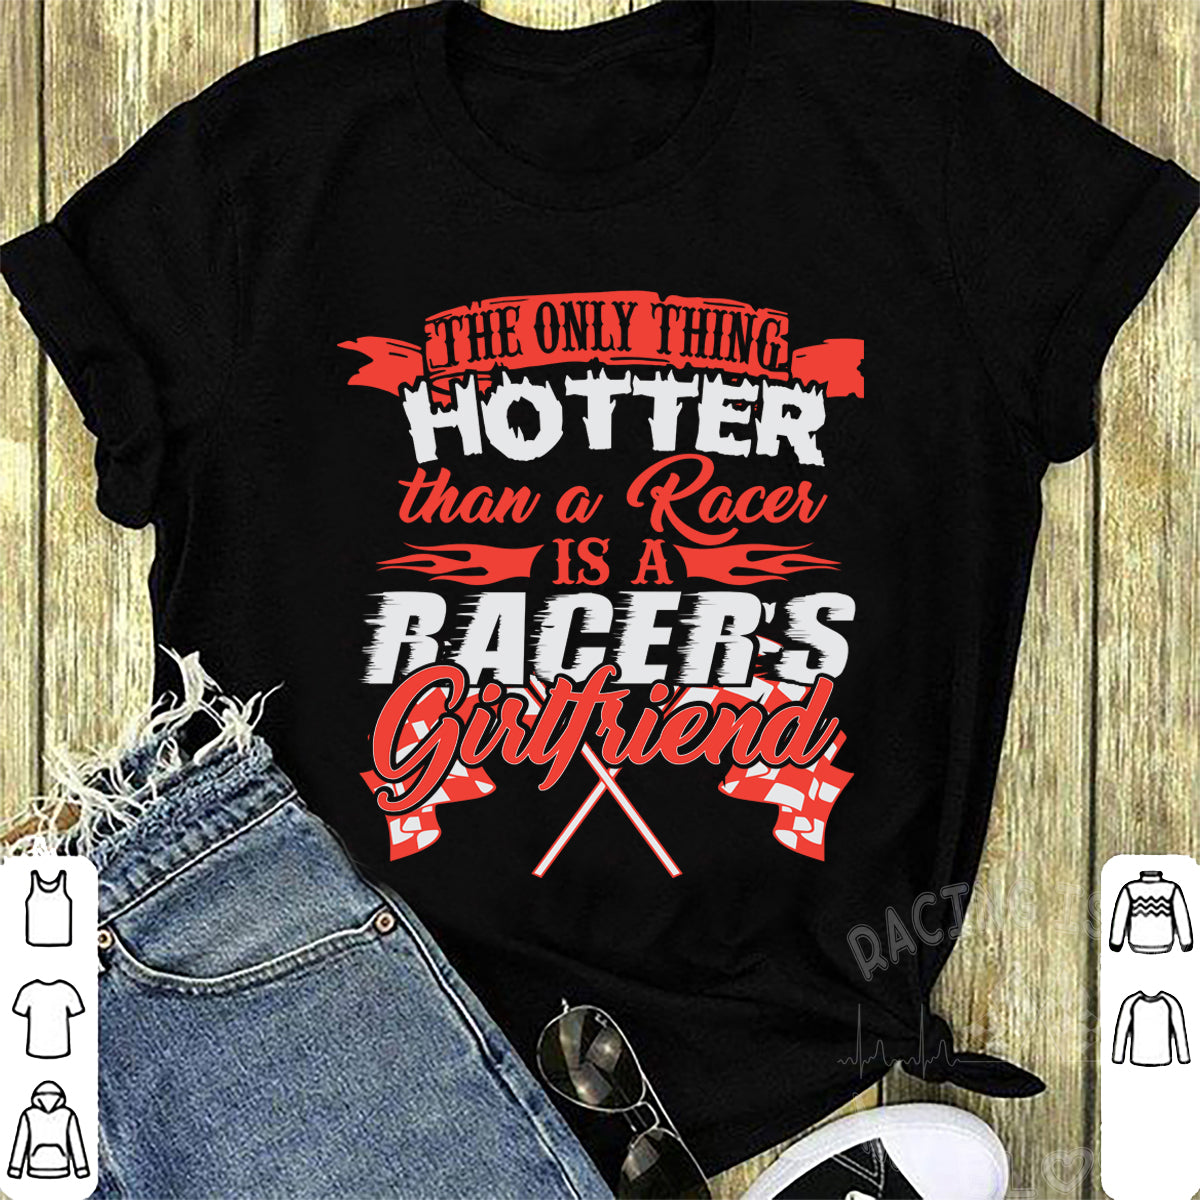 The Only Thing That Hotter than A Racer Is A Racer's Girlfriend T-Shirts!